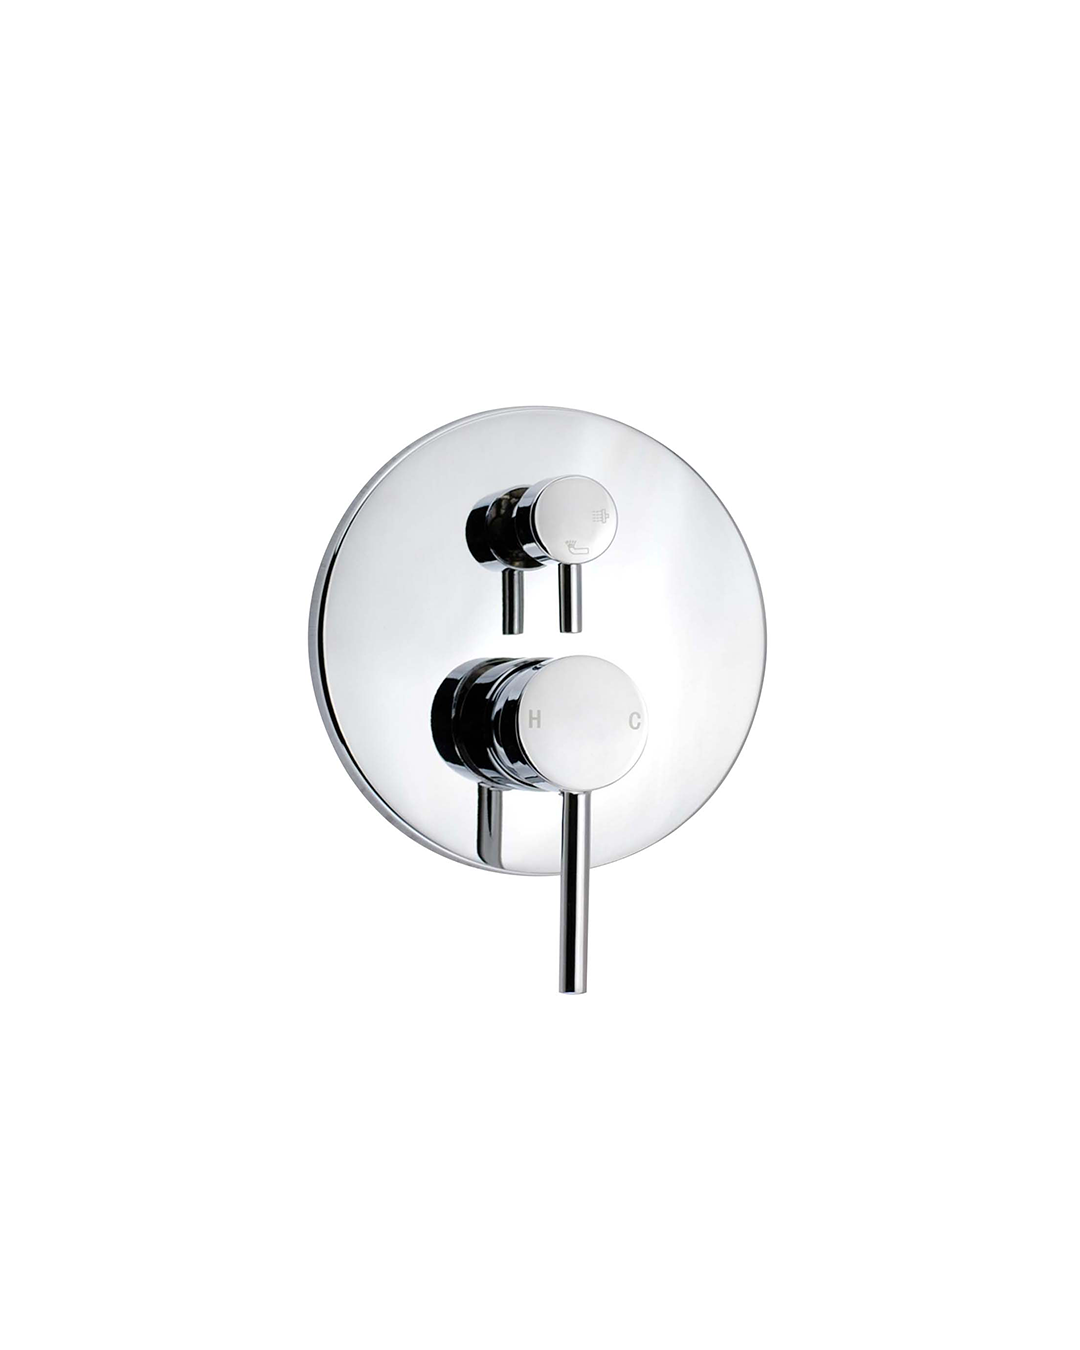 Pentro Wall Mixer with Diverter